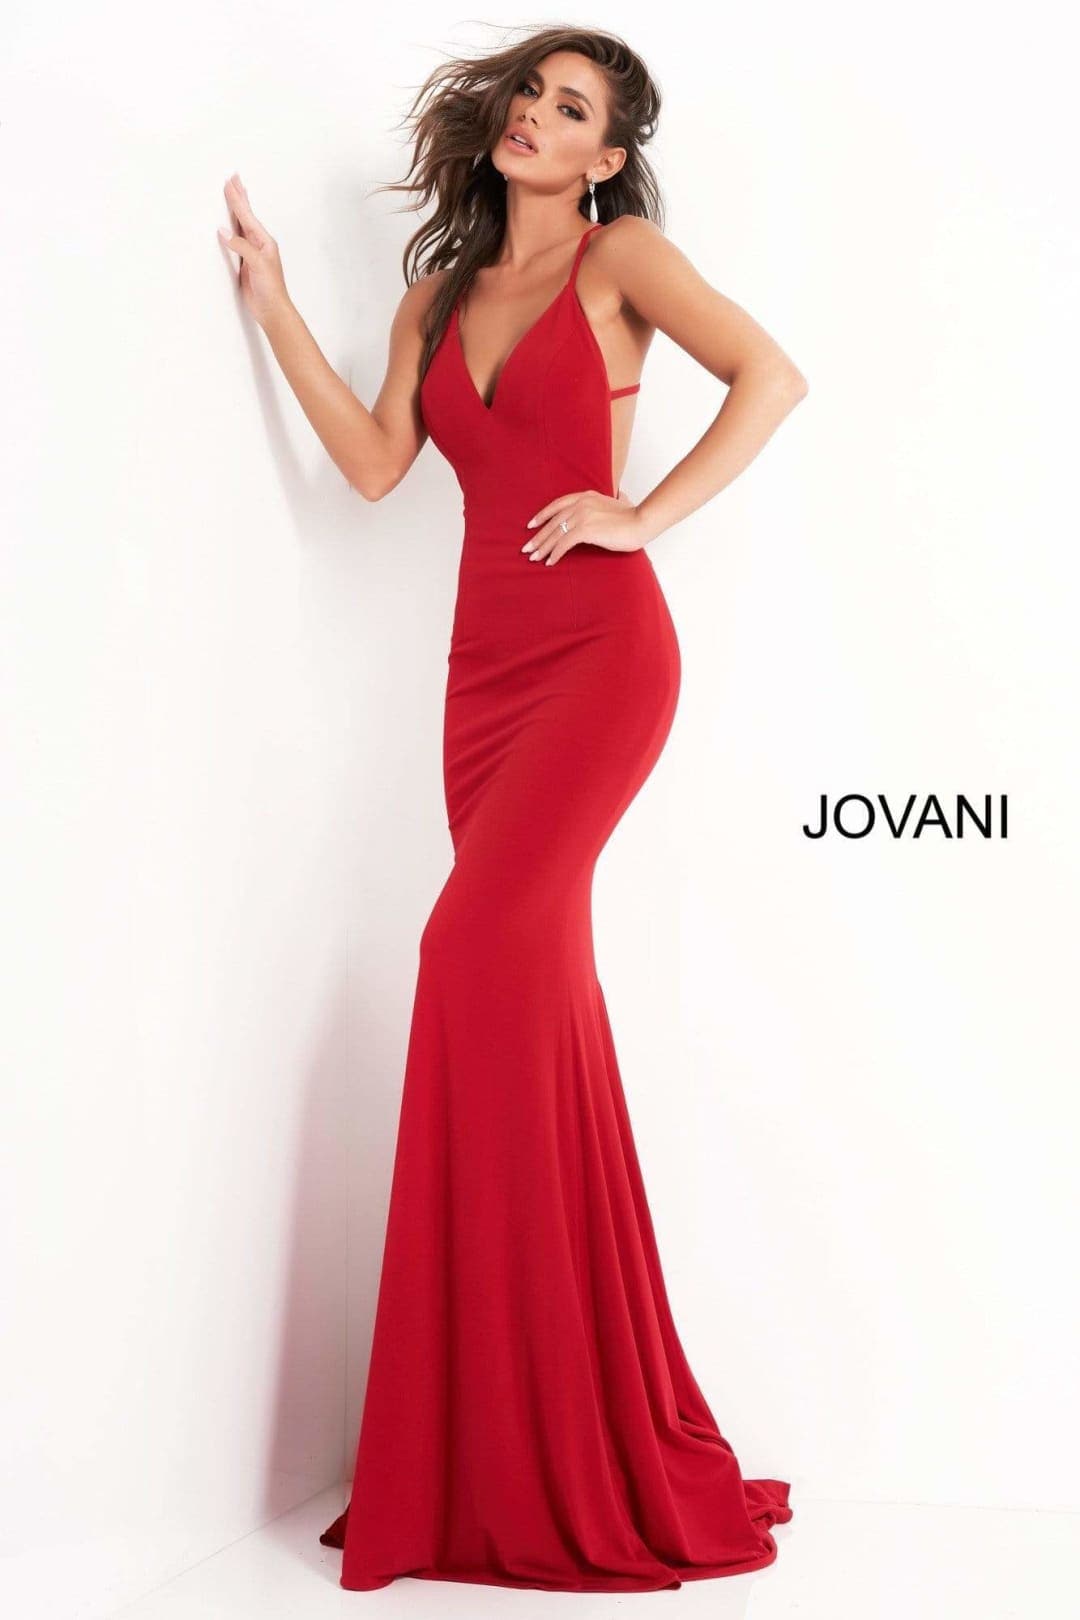 Jovani 00512 Plunging V-neck Strappy Prom Evening Gown - RED / 4